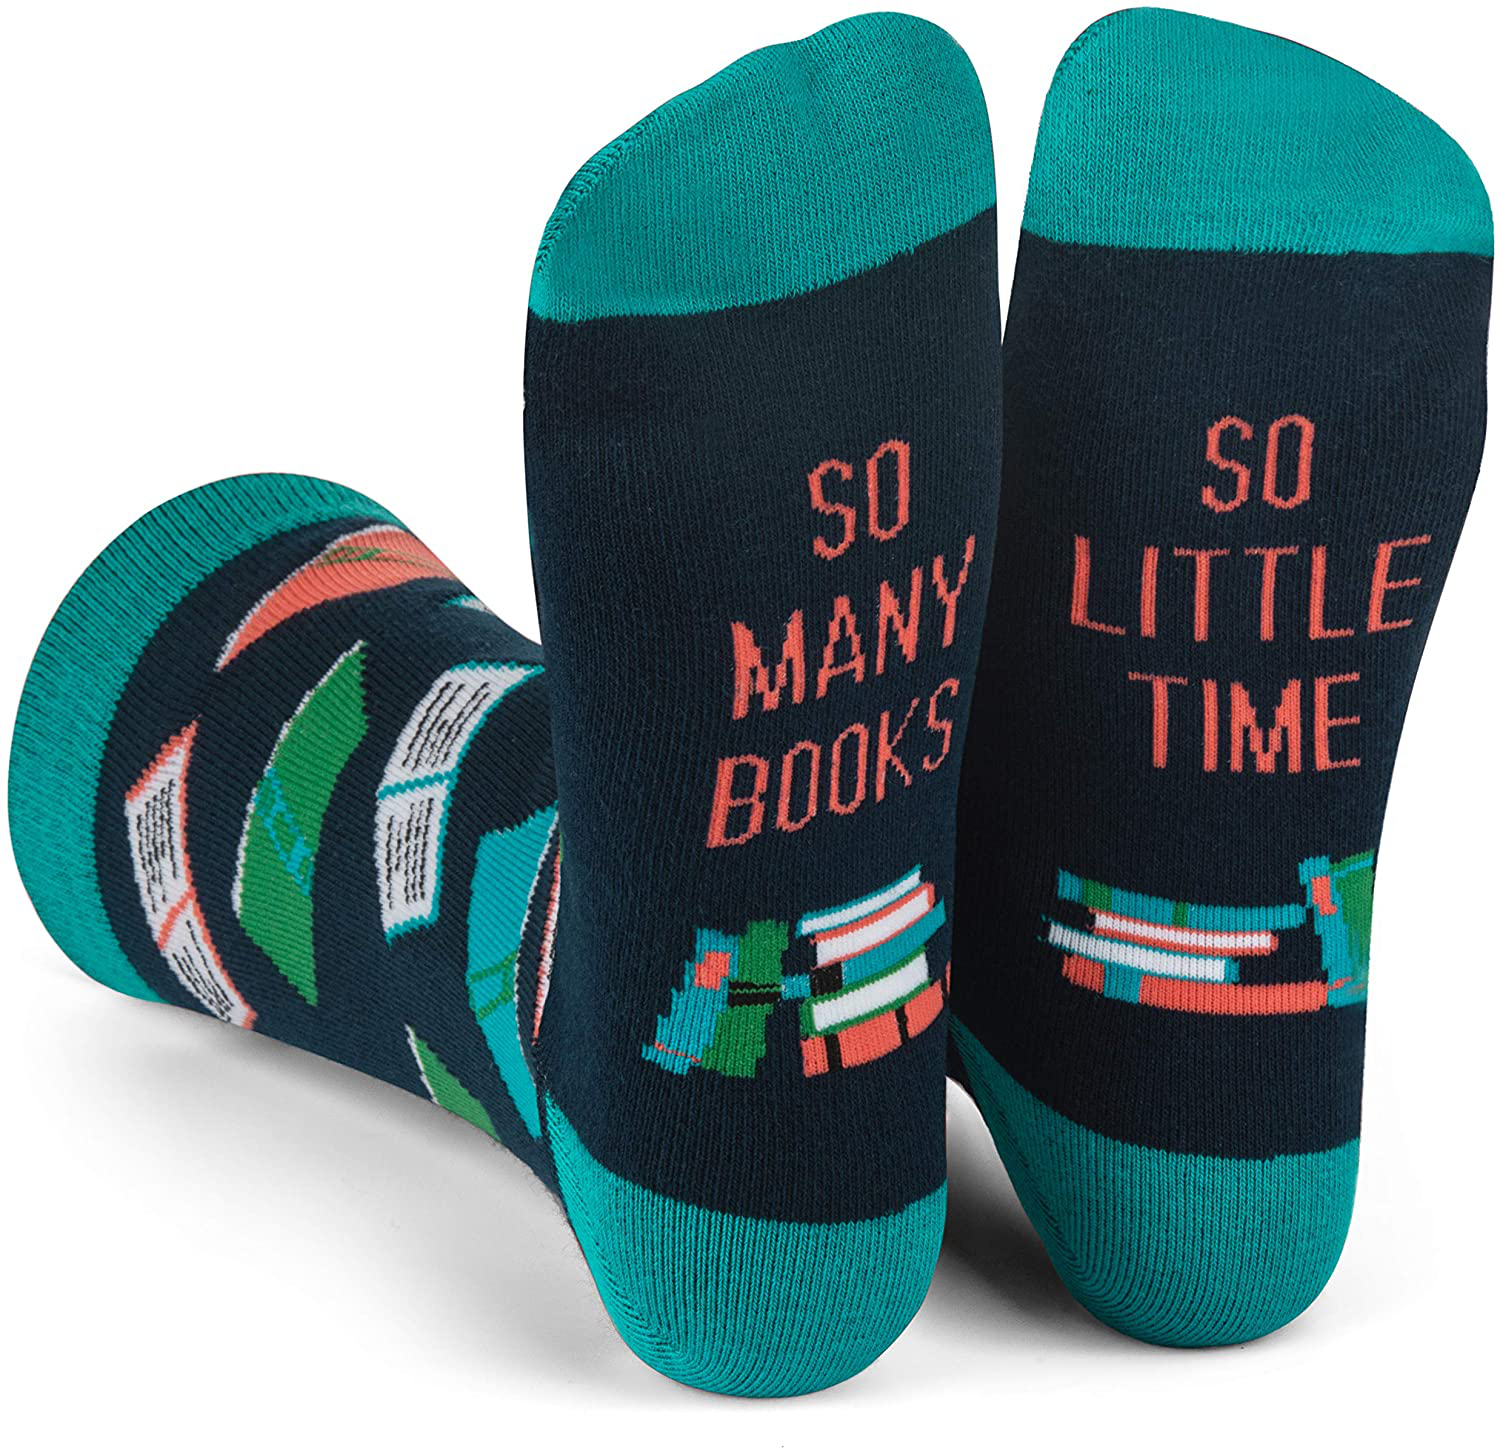 Funny Nerd Socks - Gift for Teachers, Students, Book Lovers, Math, Science Geeks